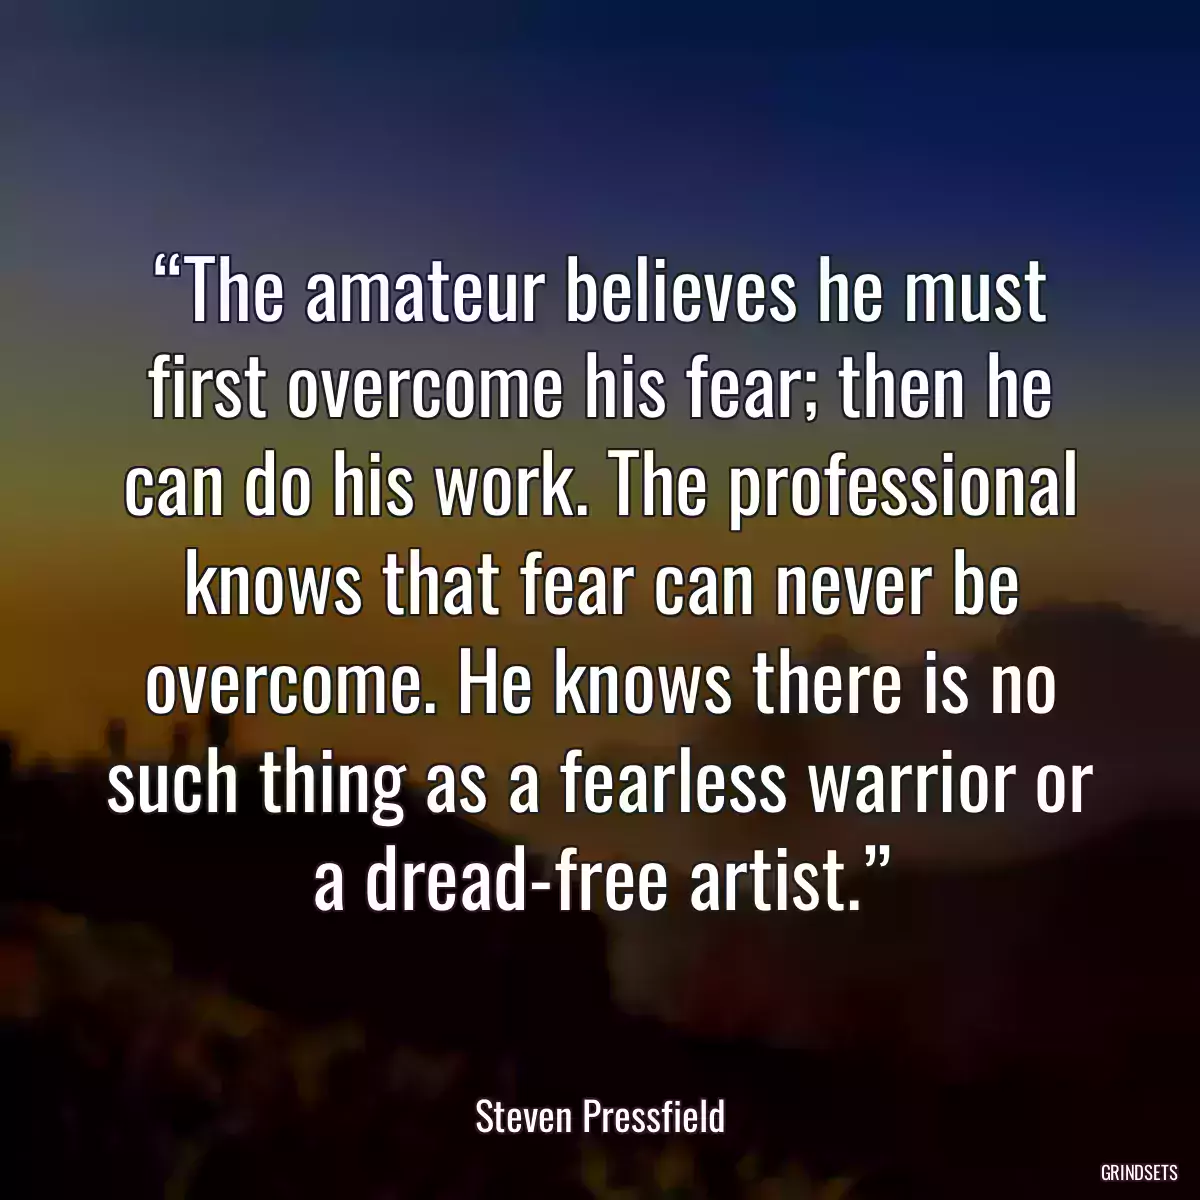 “The amateur believes he must first overcome his fear; then he can do his work. The professional knows that fear can never be overcome. He knows there is no such thing as a fearless warrior or a dread-free artist.”